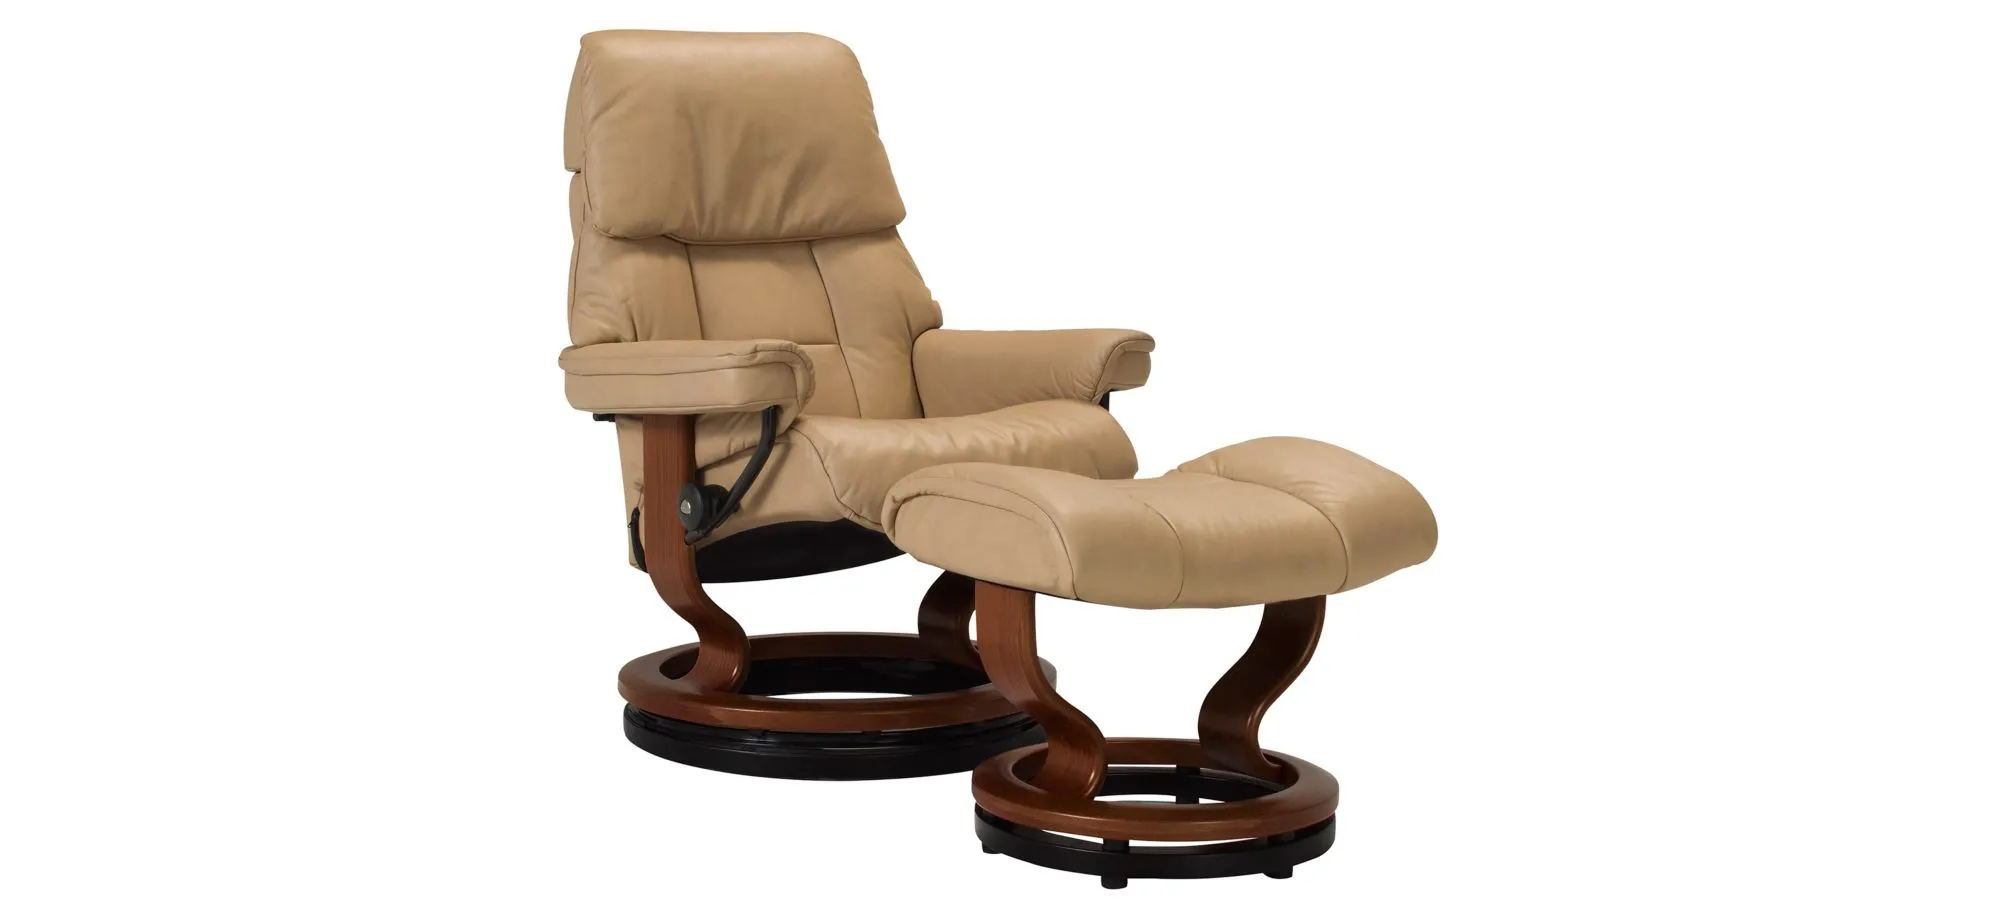 Stressless Ruby Small Leather Reclining Chair and Ottoman w/ Rings in Sand / Brown by Stressless